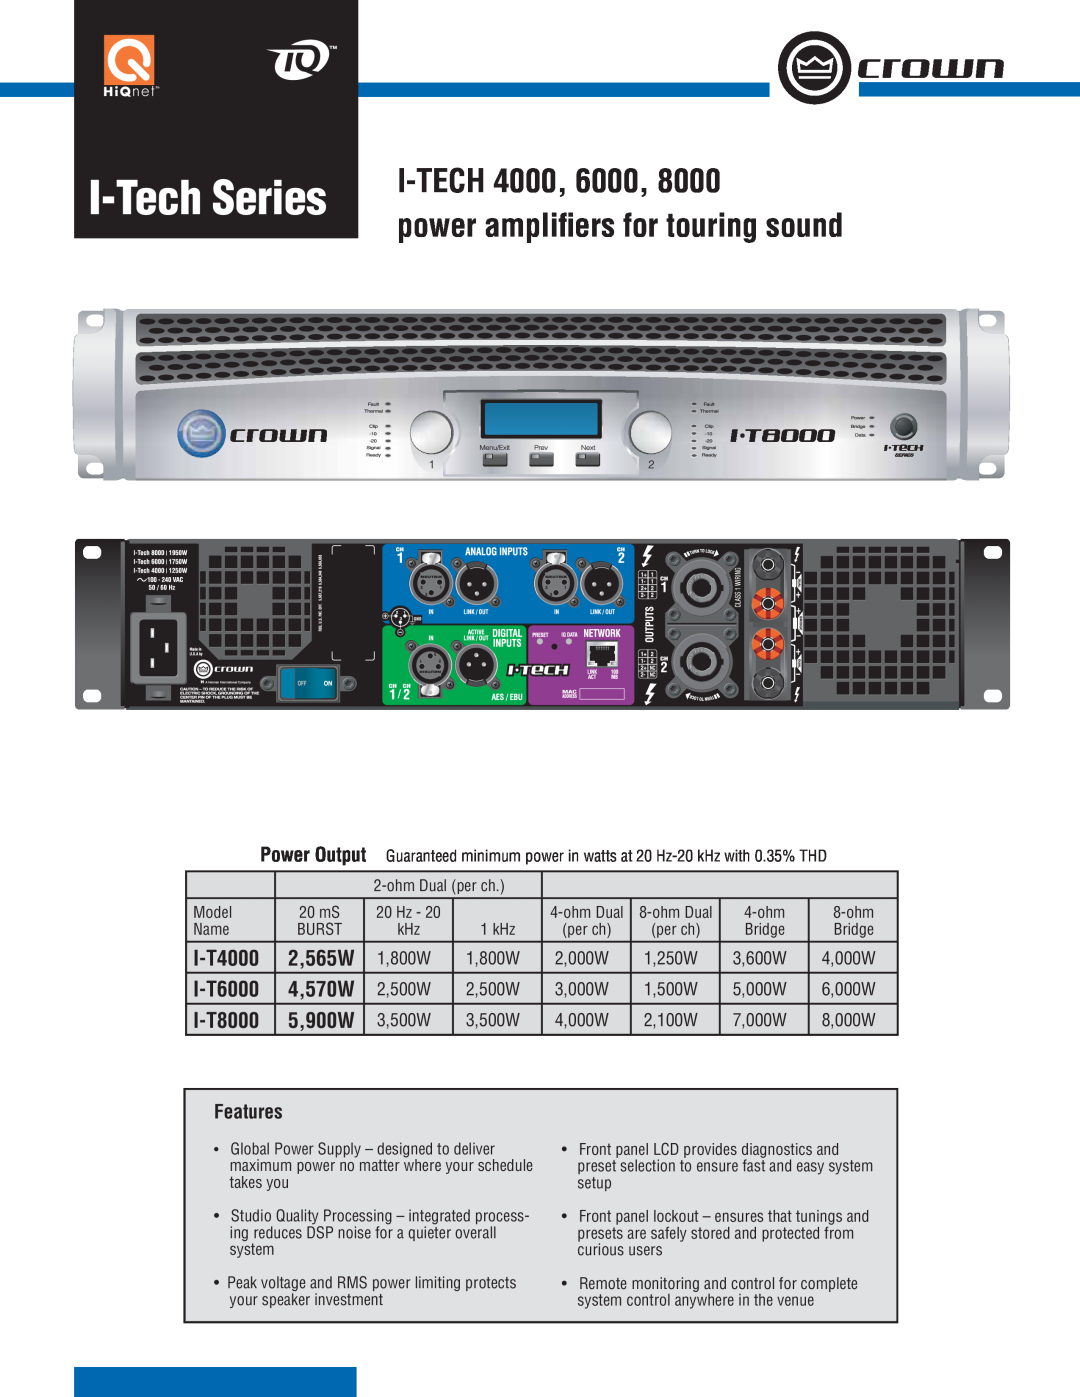 Crown Audio I-TECH 8000 manual I-TechSeries, I-TECH4000, power ampliﬁers for touring sound, I-T4000, I-T6000, I-T8000 